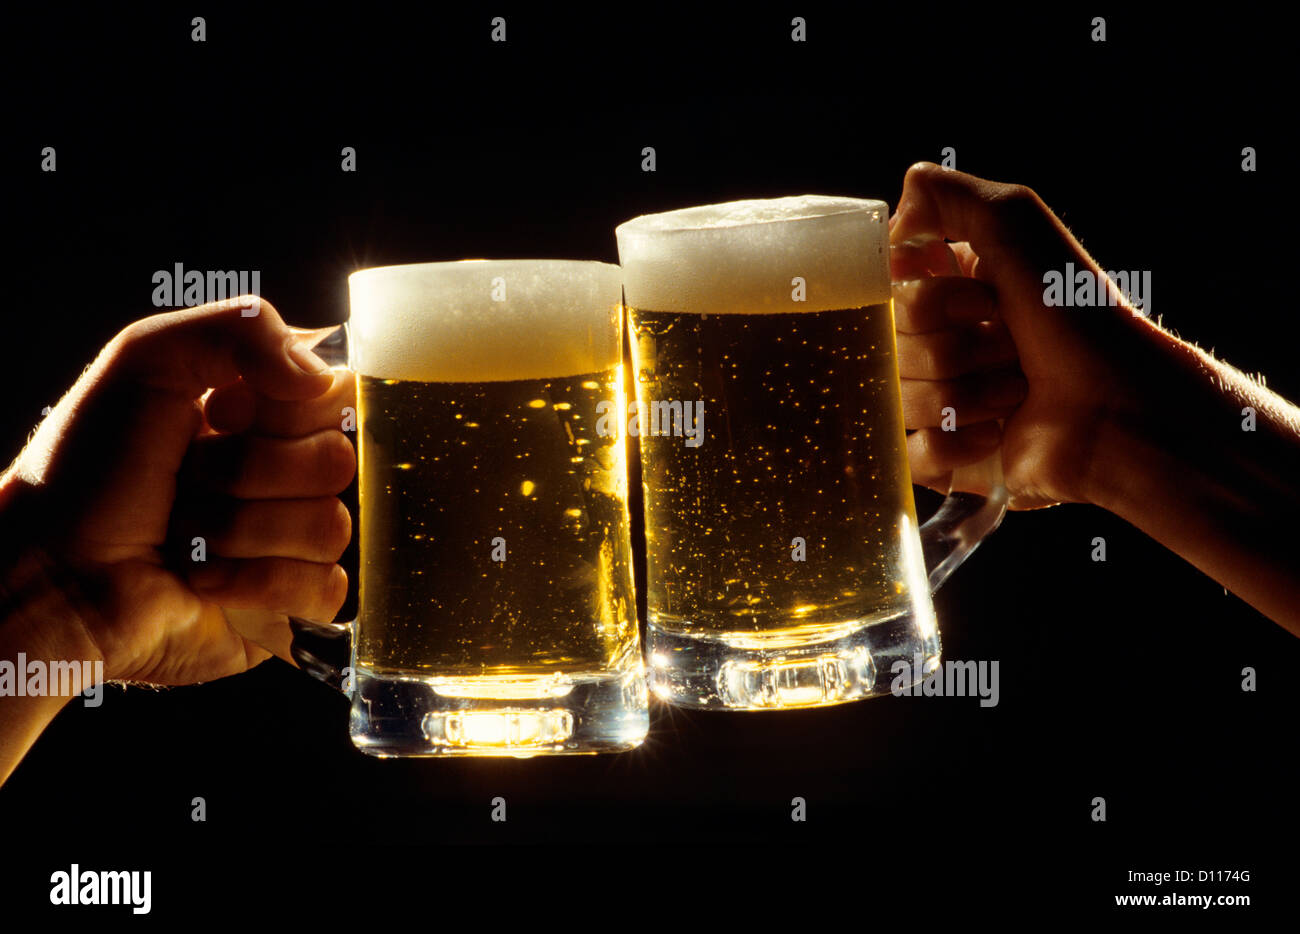 TWO MALE HANDS TOASTING WITH FULL BEER MUGS Stock Photo